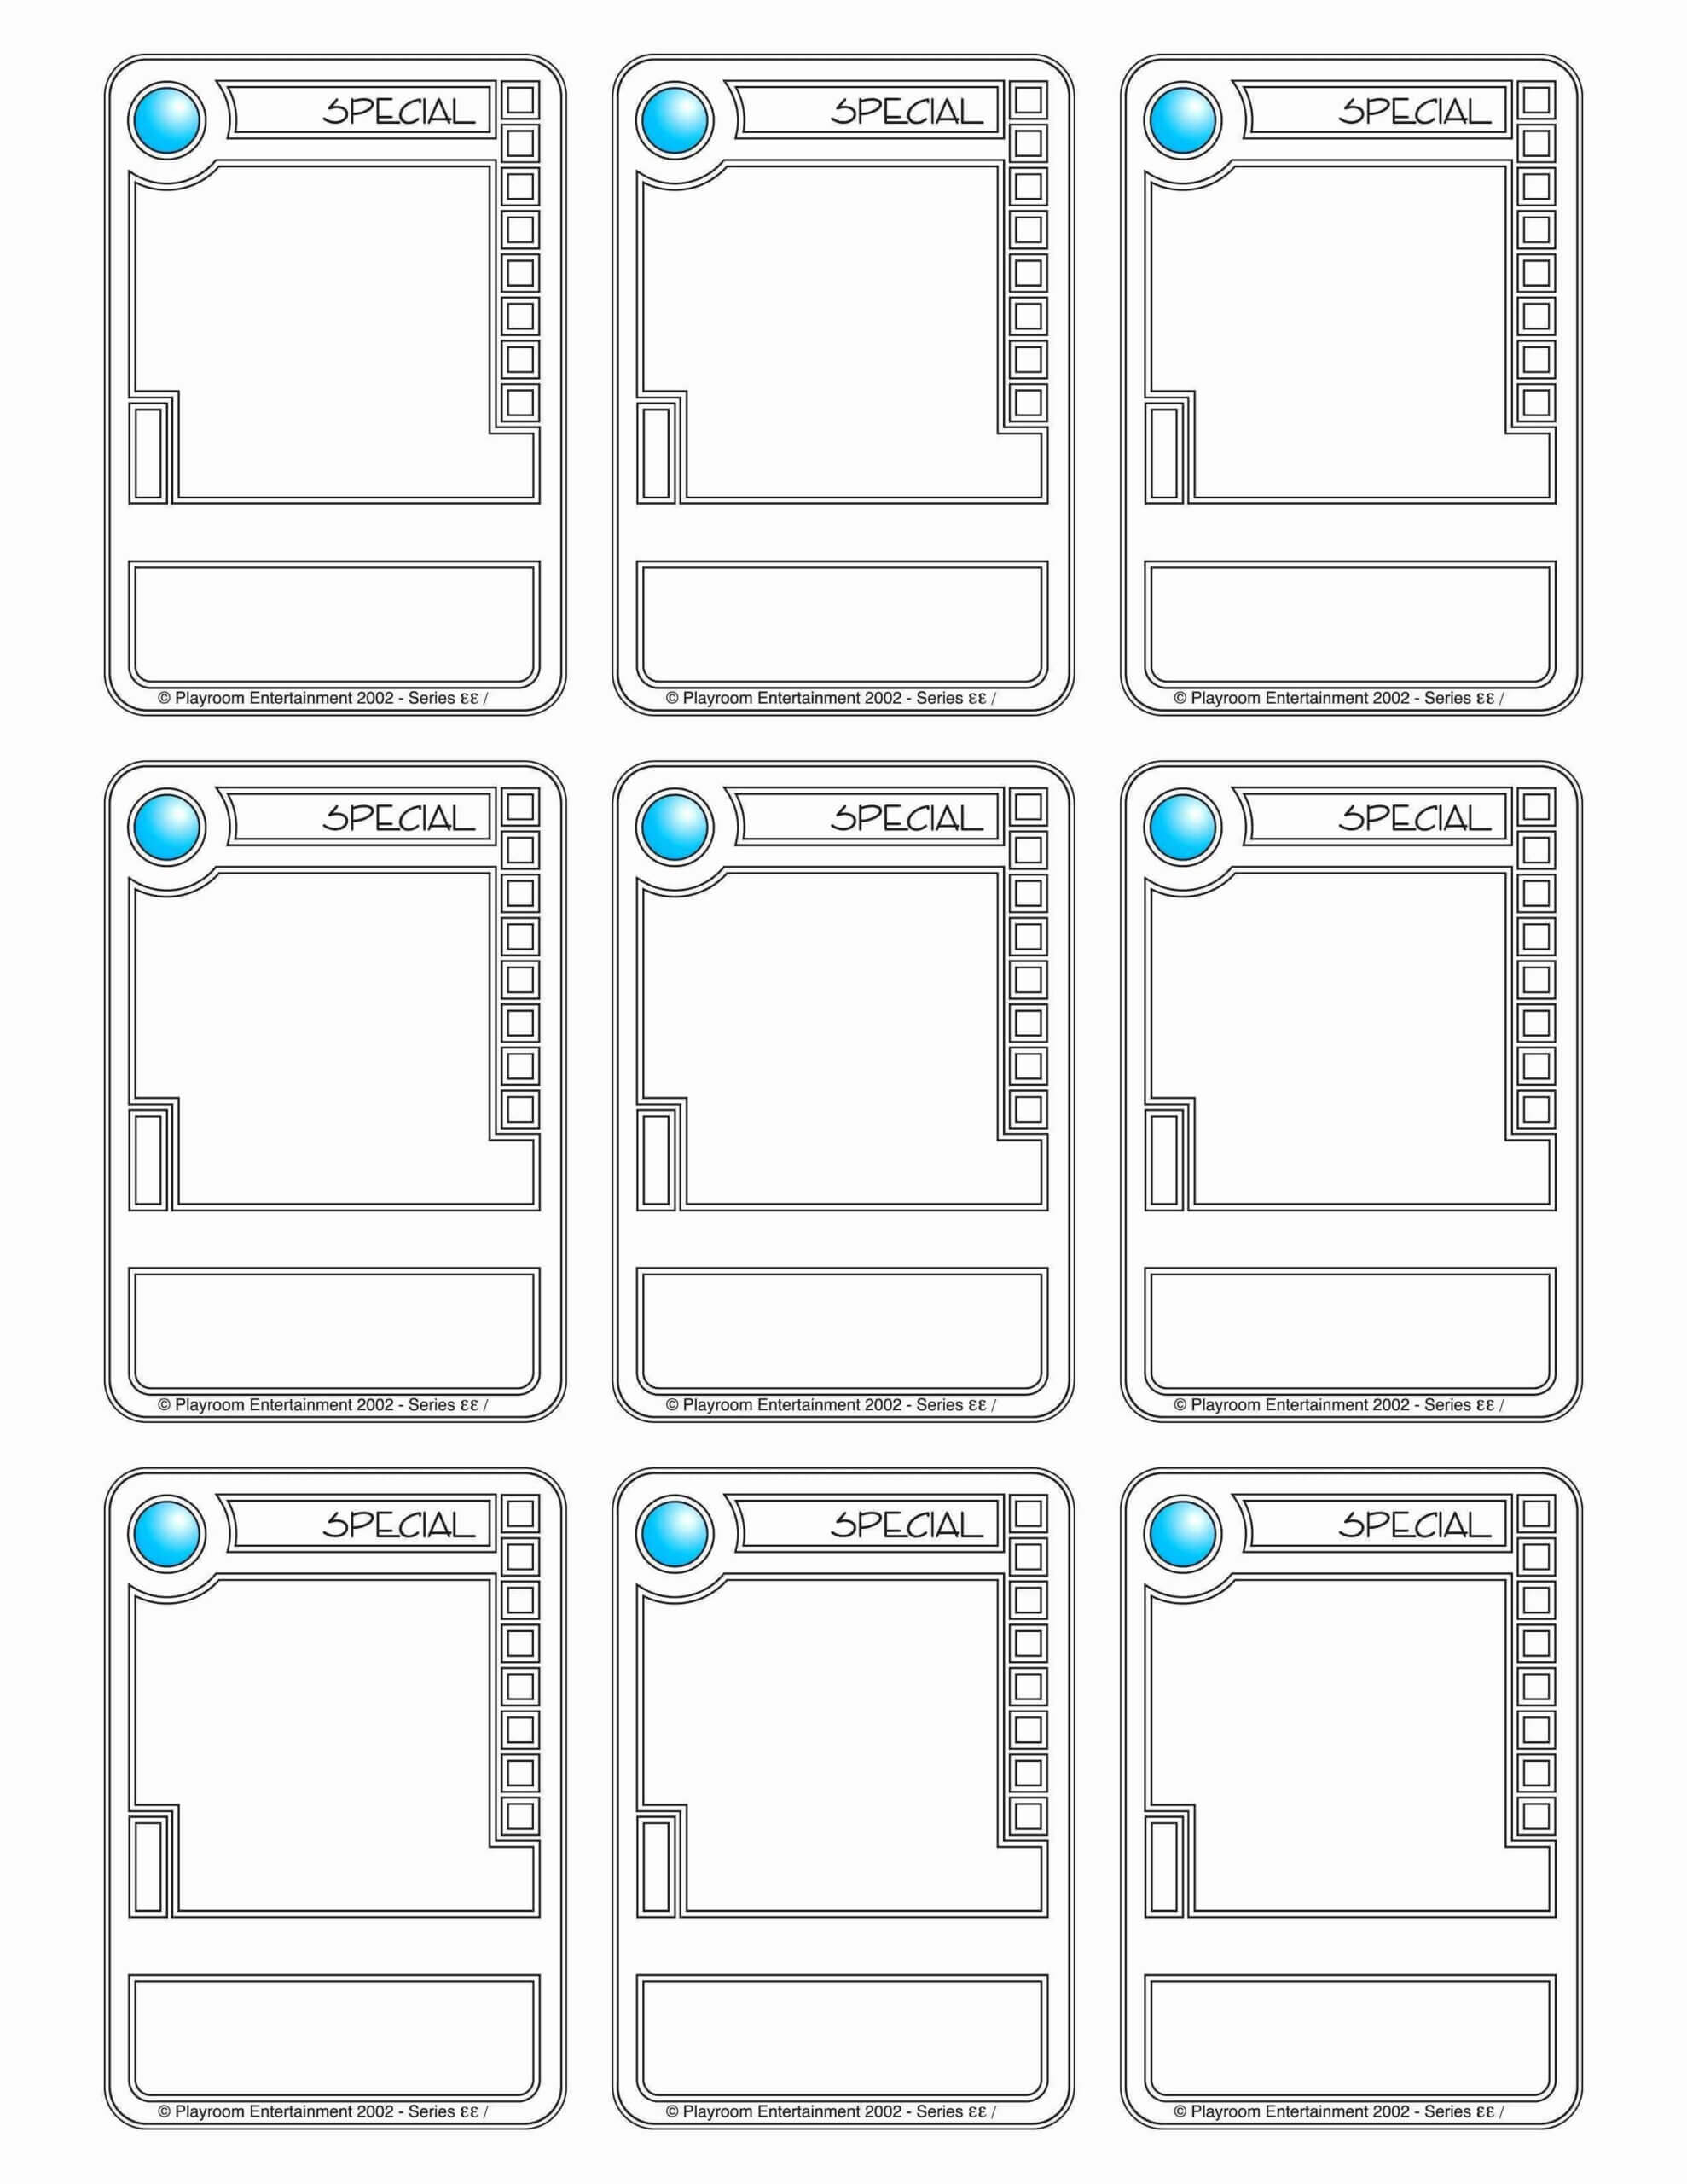 001 Trading Card Maker Free Examples Template For Success In Regarding Template For Game Cards